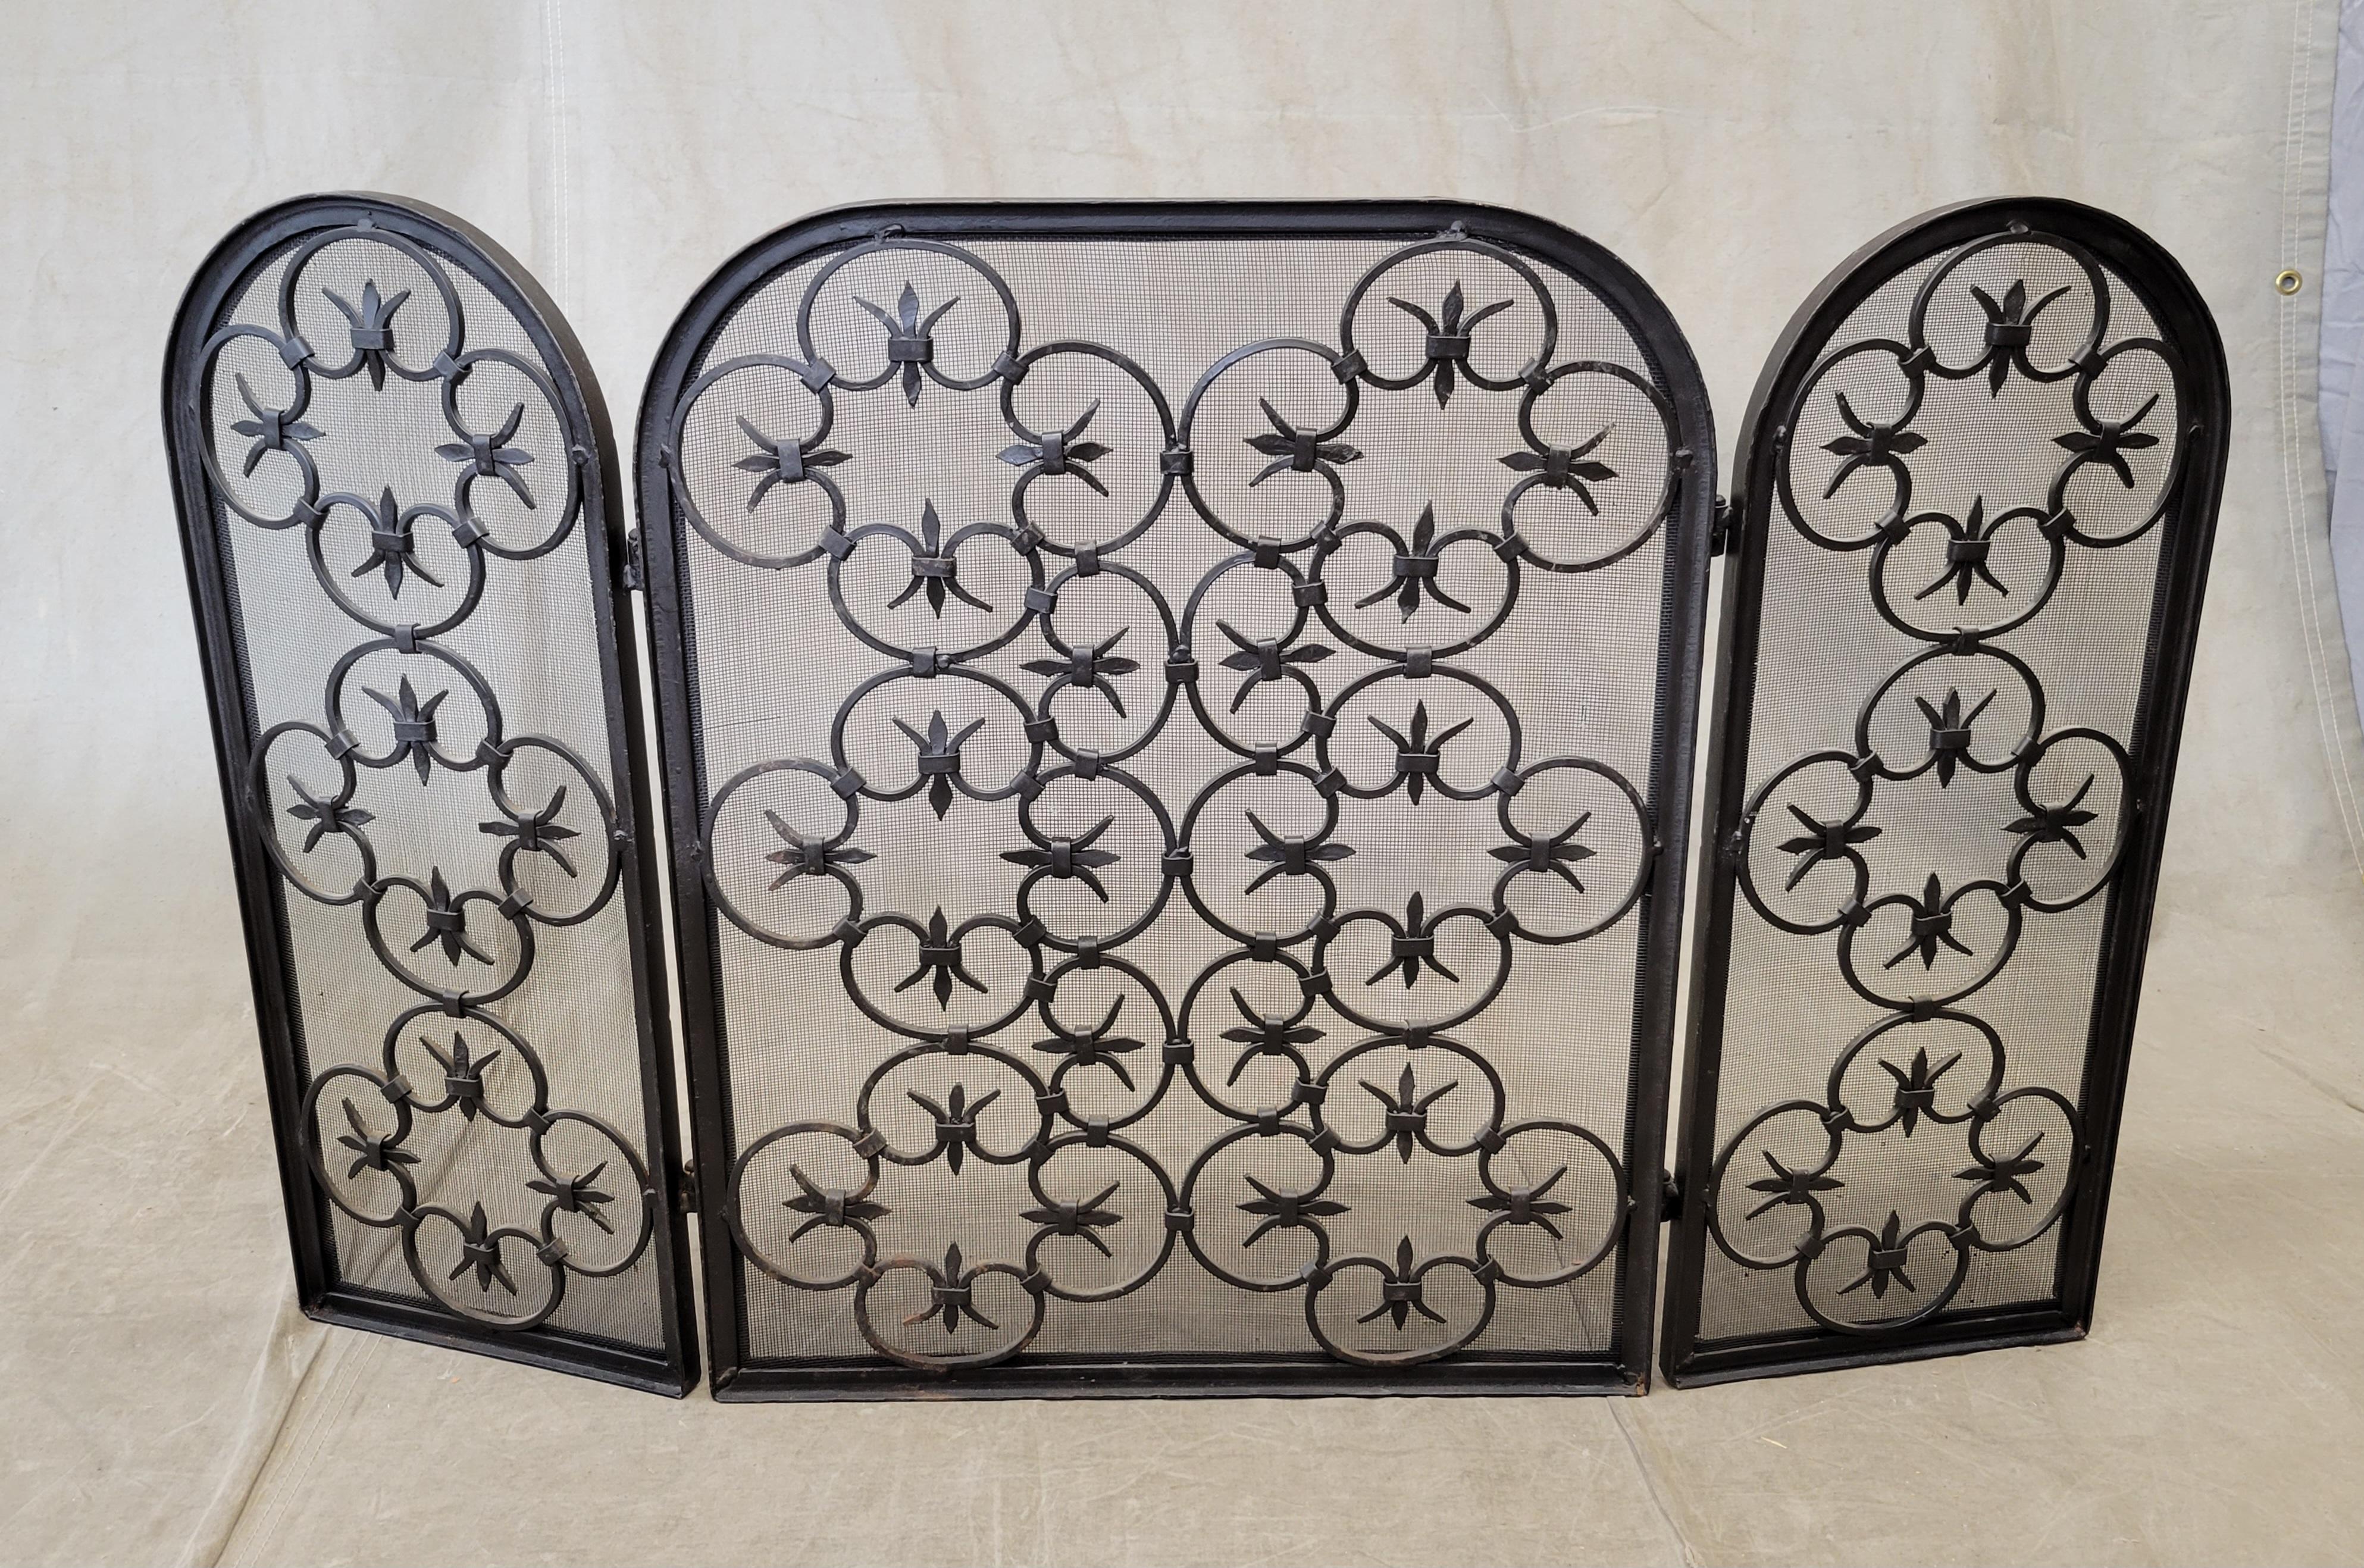 An elegant and functional vintage Spanish revival wrought iron folding fireplace screen. Comprised of C-scrolls of dark brown black iron backed by screening. Hinges open and close easily. This is a heavy, sturdy screen weighing 45 pounds.
Flat